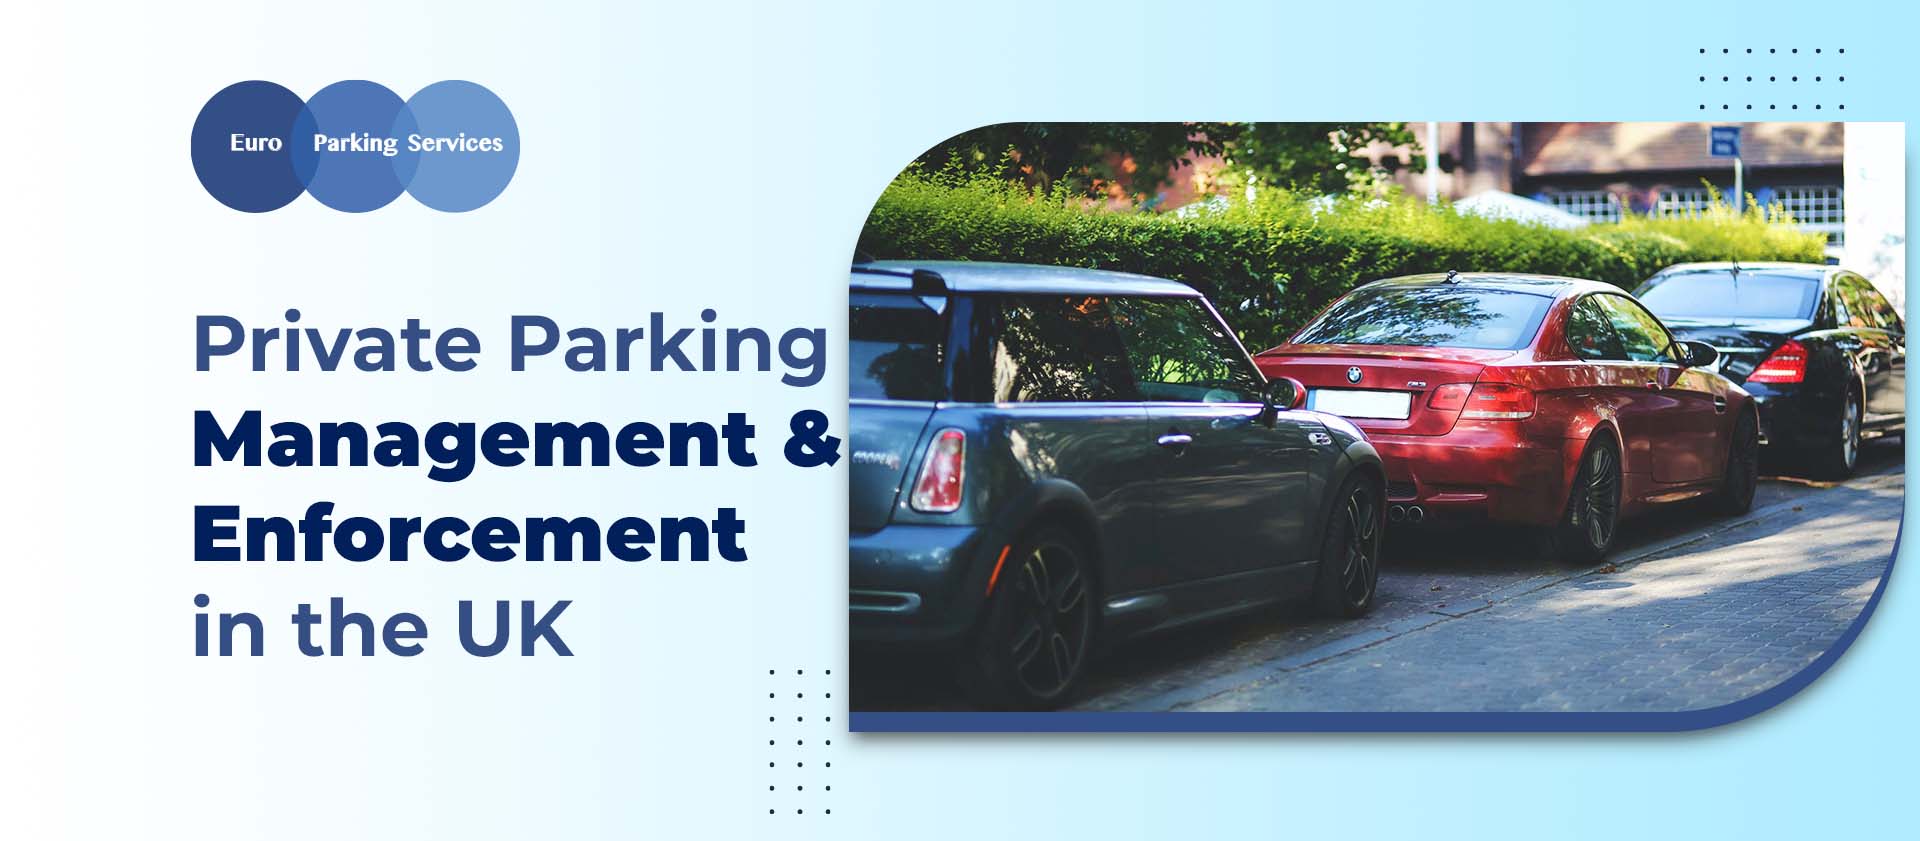 Private Parking Management & Enforcement in the UK<br />
